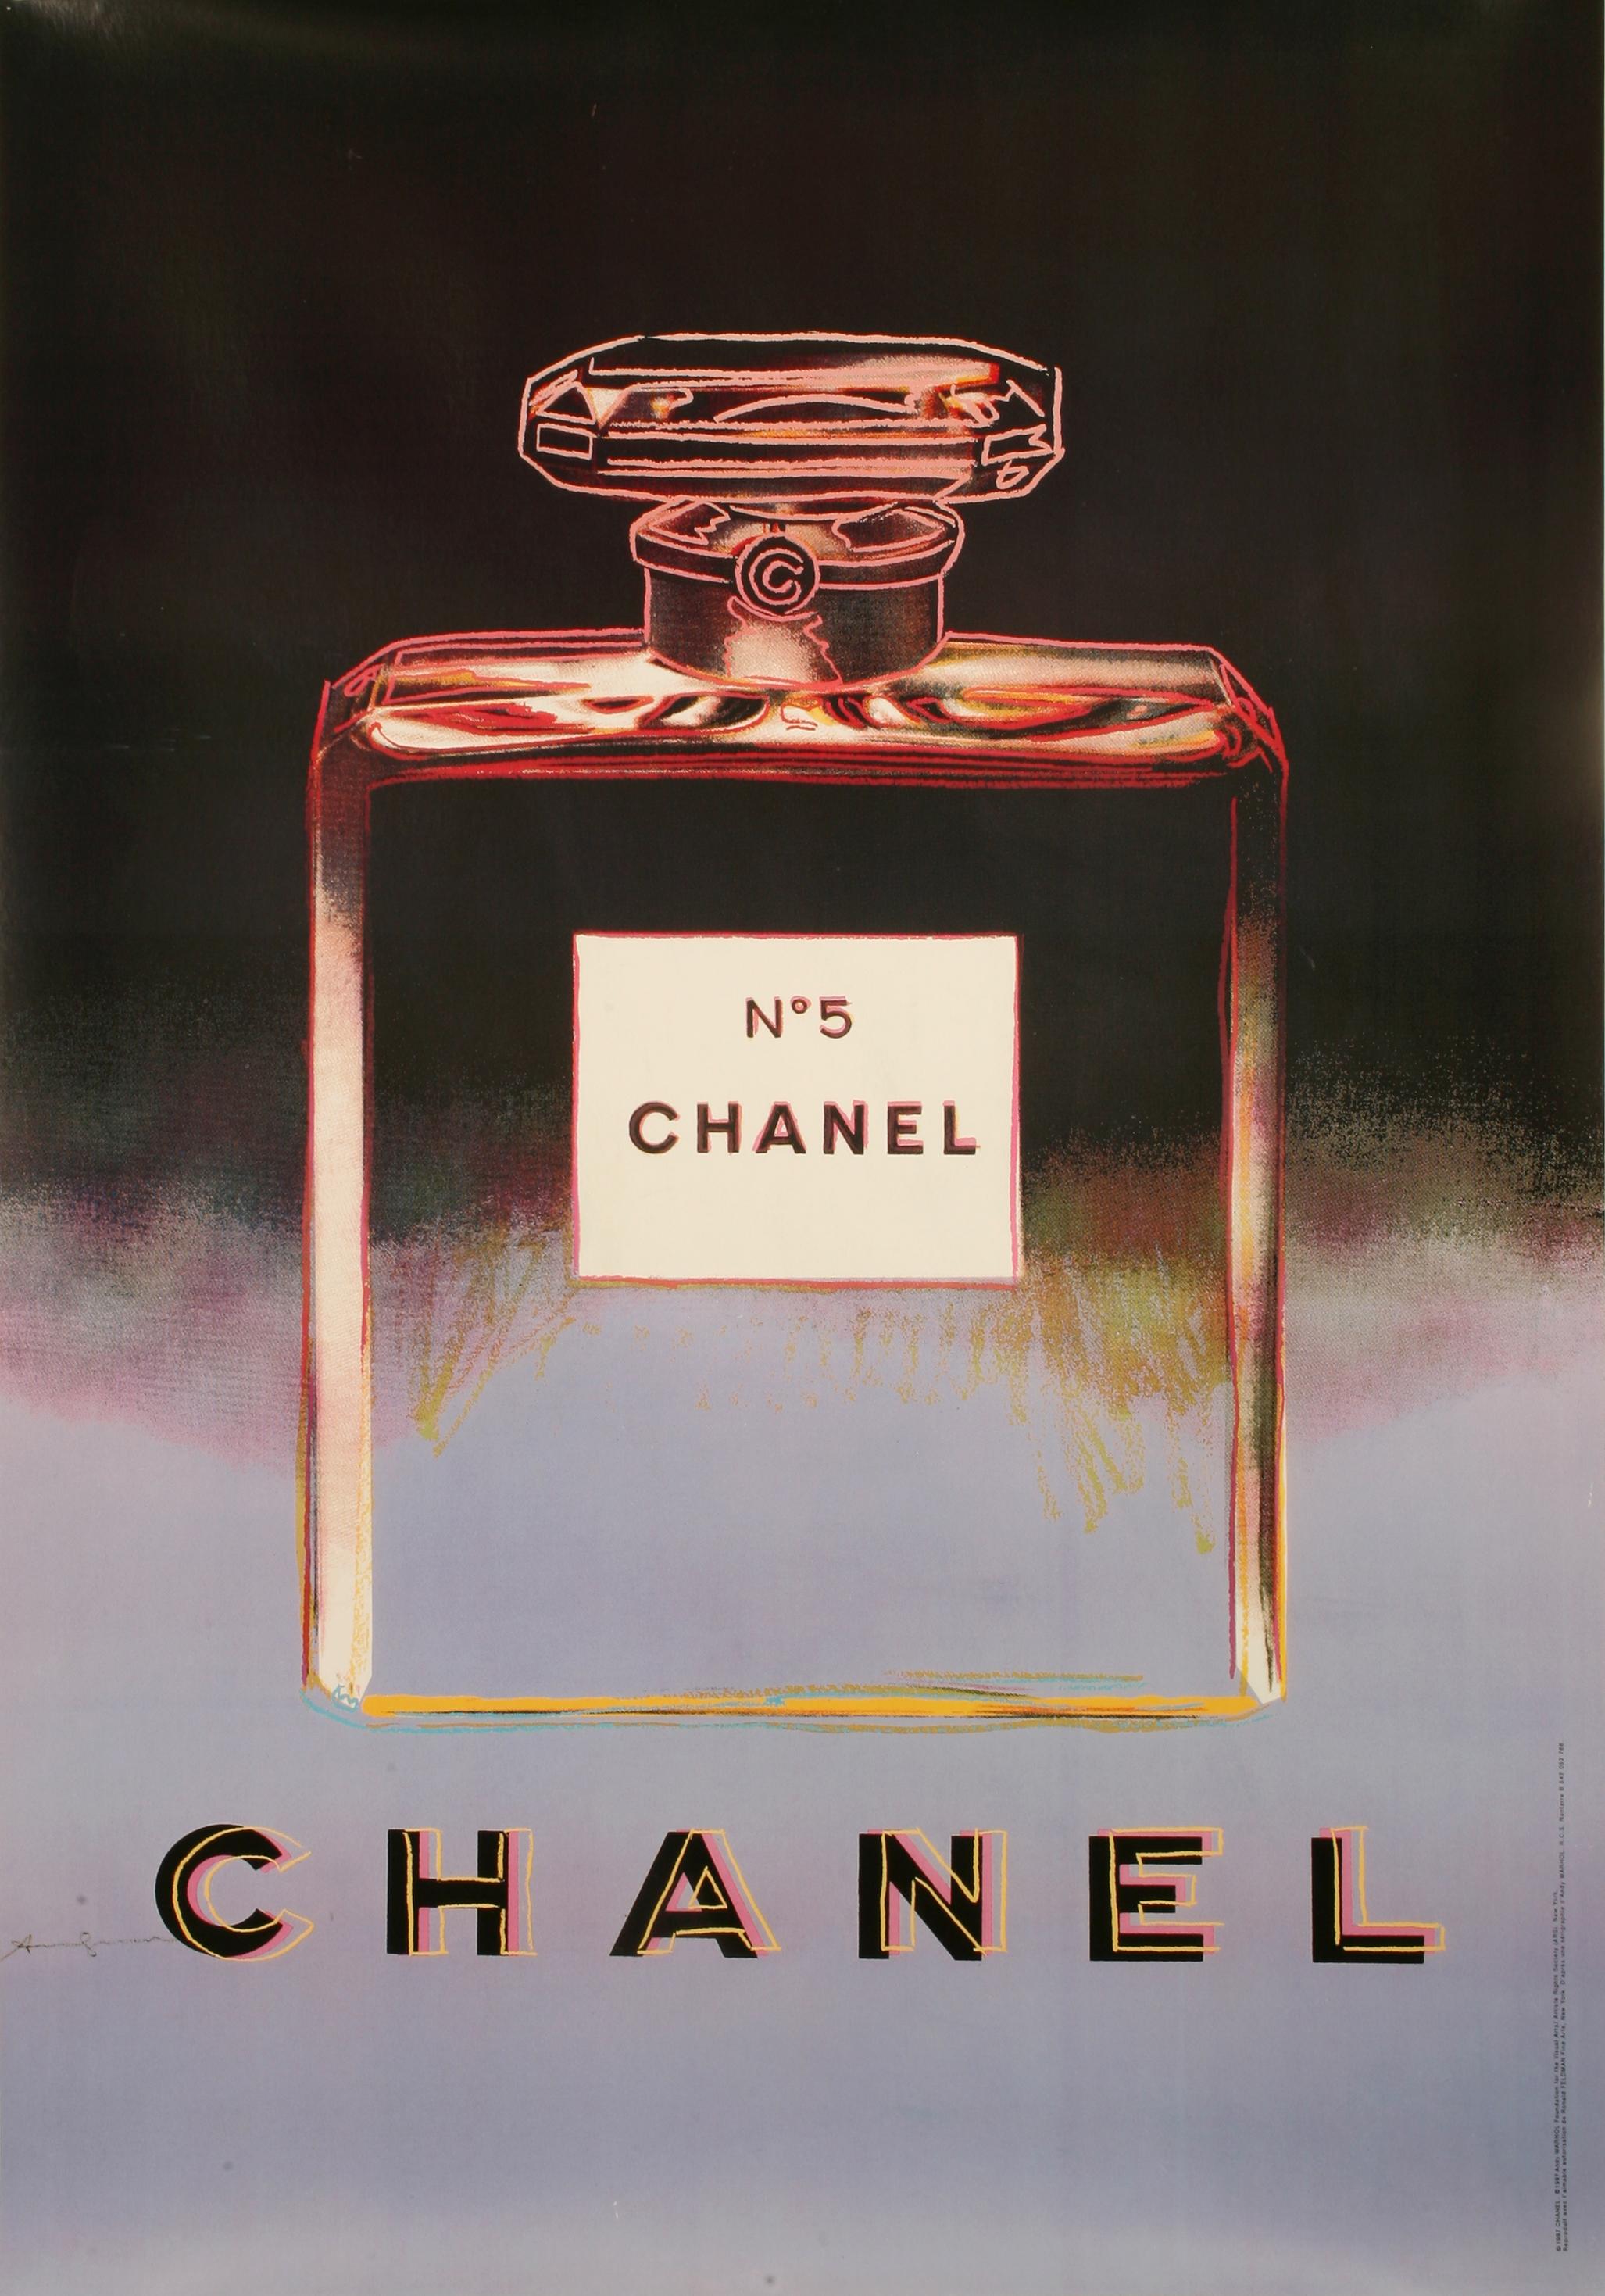 Modern After Andy Warhol, Original Chanel N° 5 Poster, Couture Perfume, Pop Art, 1997